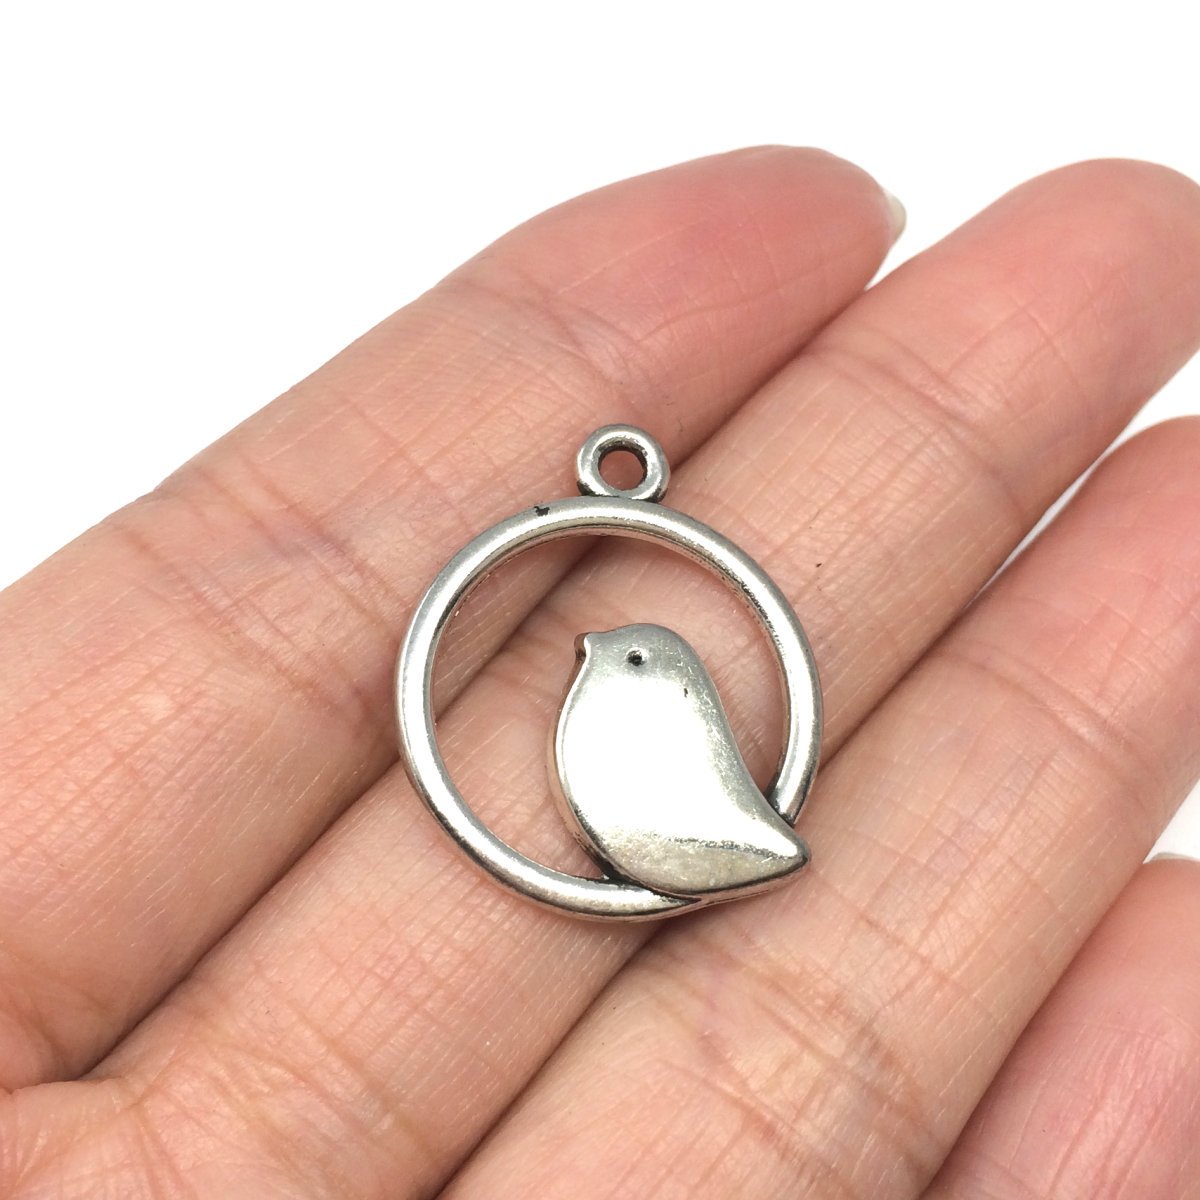 Excited to share the latest addition to my #etsy shop: 10 x Bird Charms 20mm Antique Silver Tone | One Sided Charm Pendants #MCZ412 etsy.me/2QSUqPP #supplies #silver #beading #charms #beads #charmsforbracelet #bracelets #necklace #swarovski